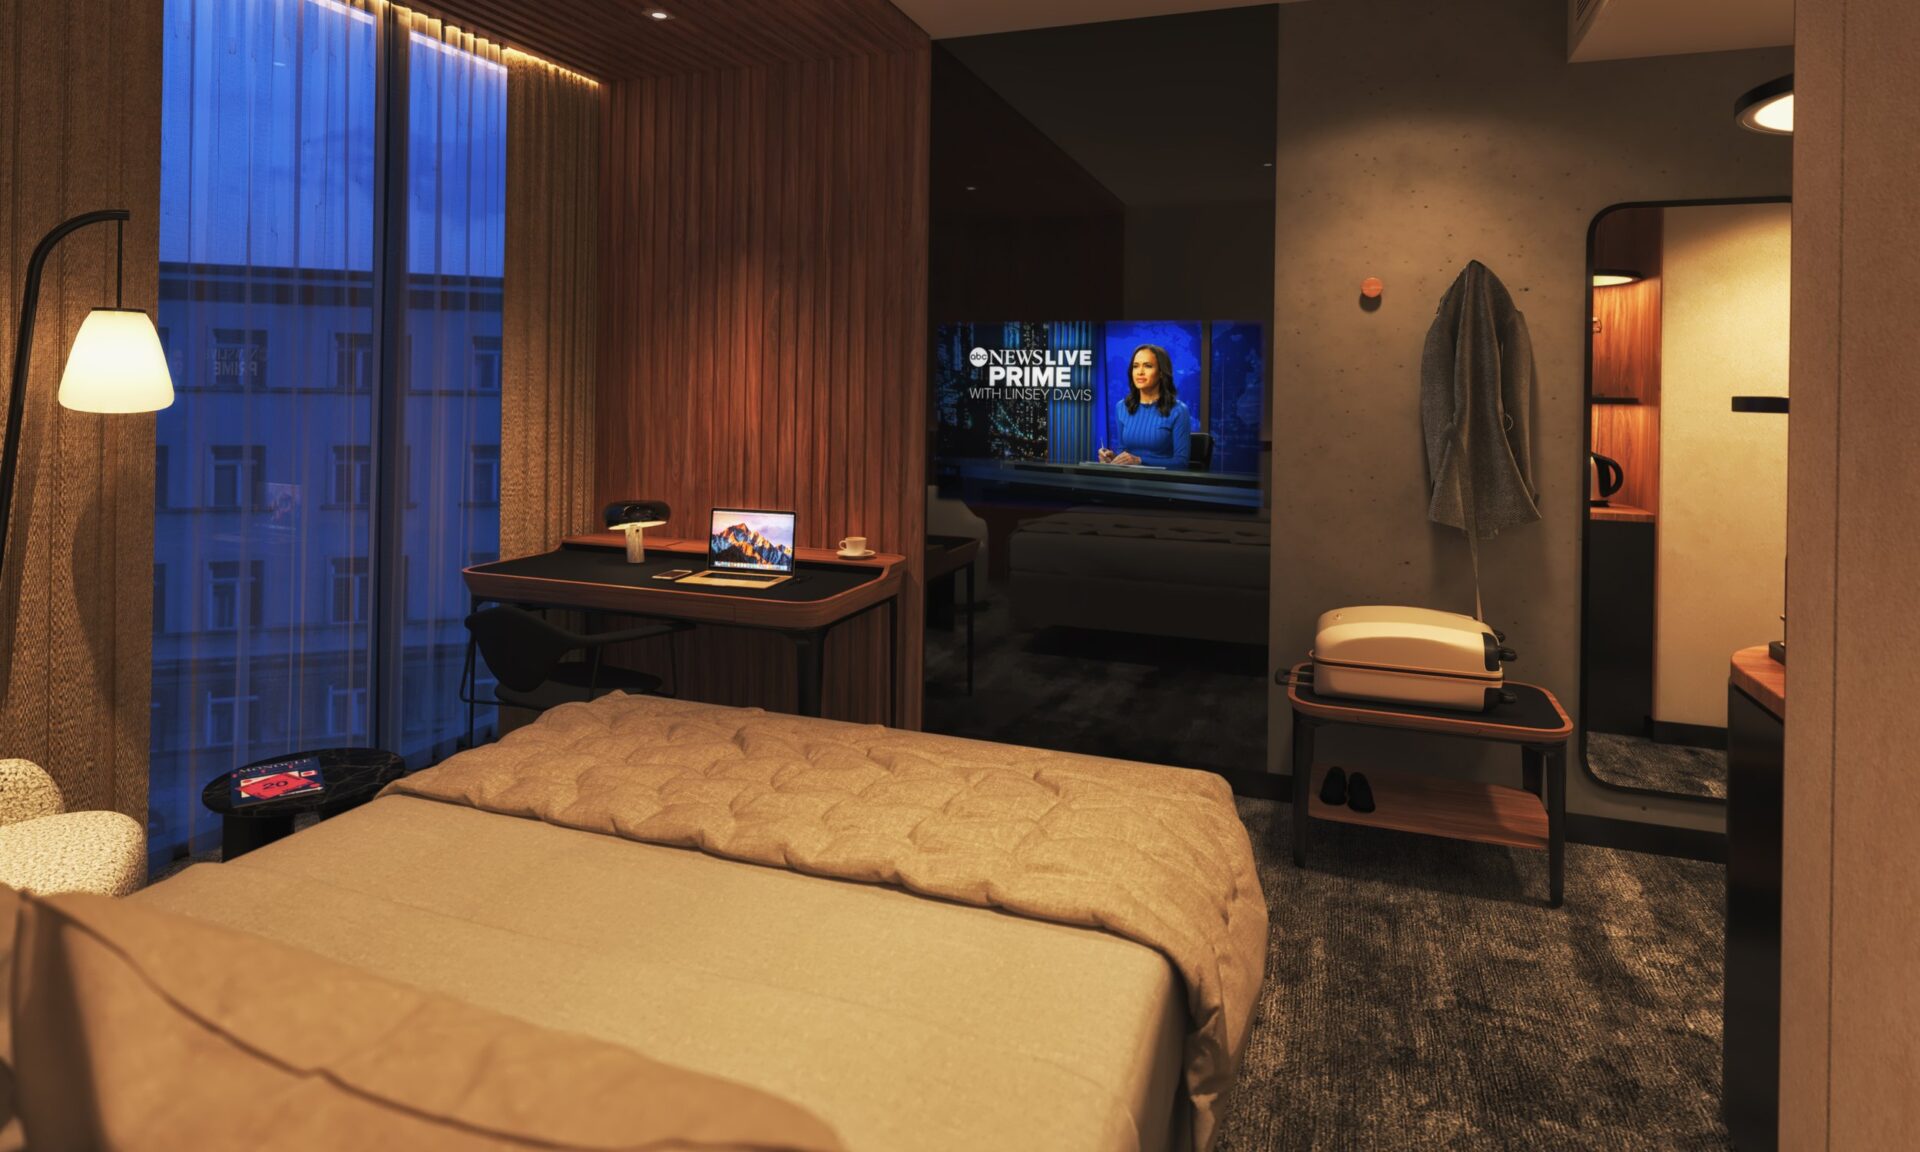 3D interior design model of Movenpick bedroom Accor, featuring Double Bed, wooden panels and modern hanging lights, TV screen and luggage area